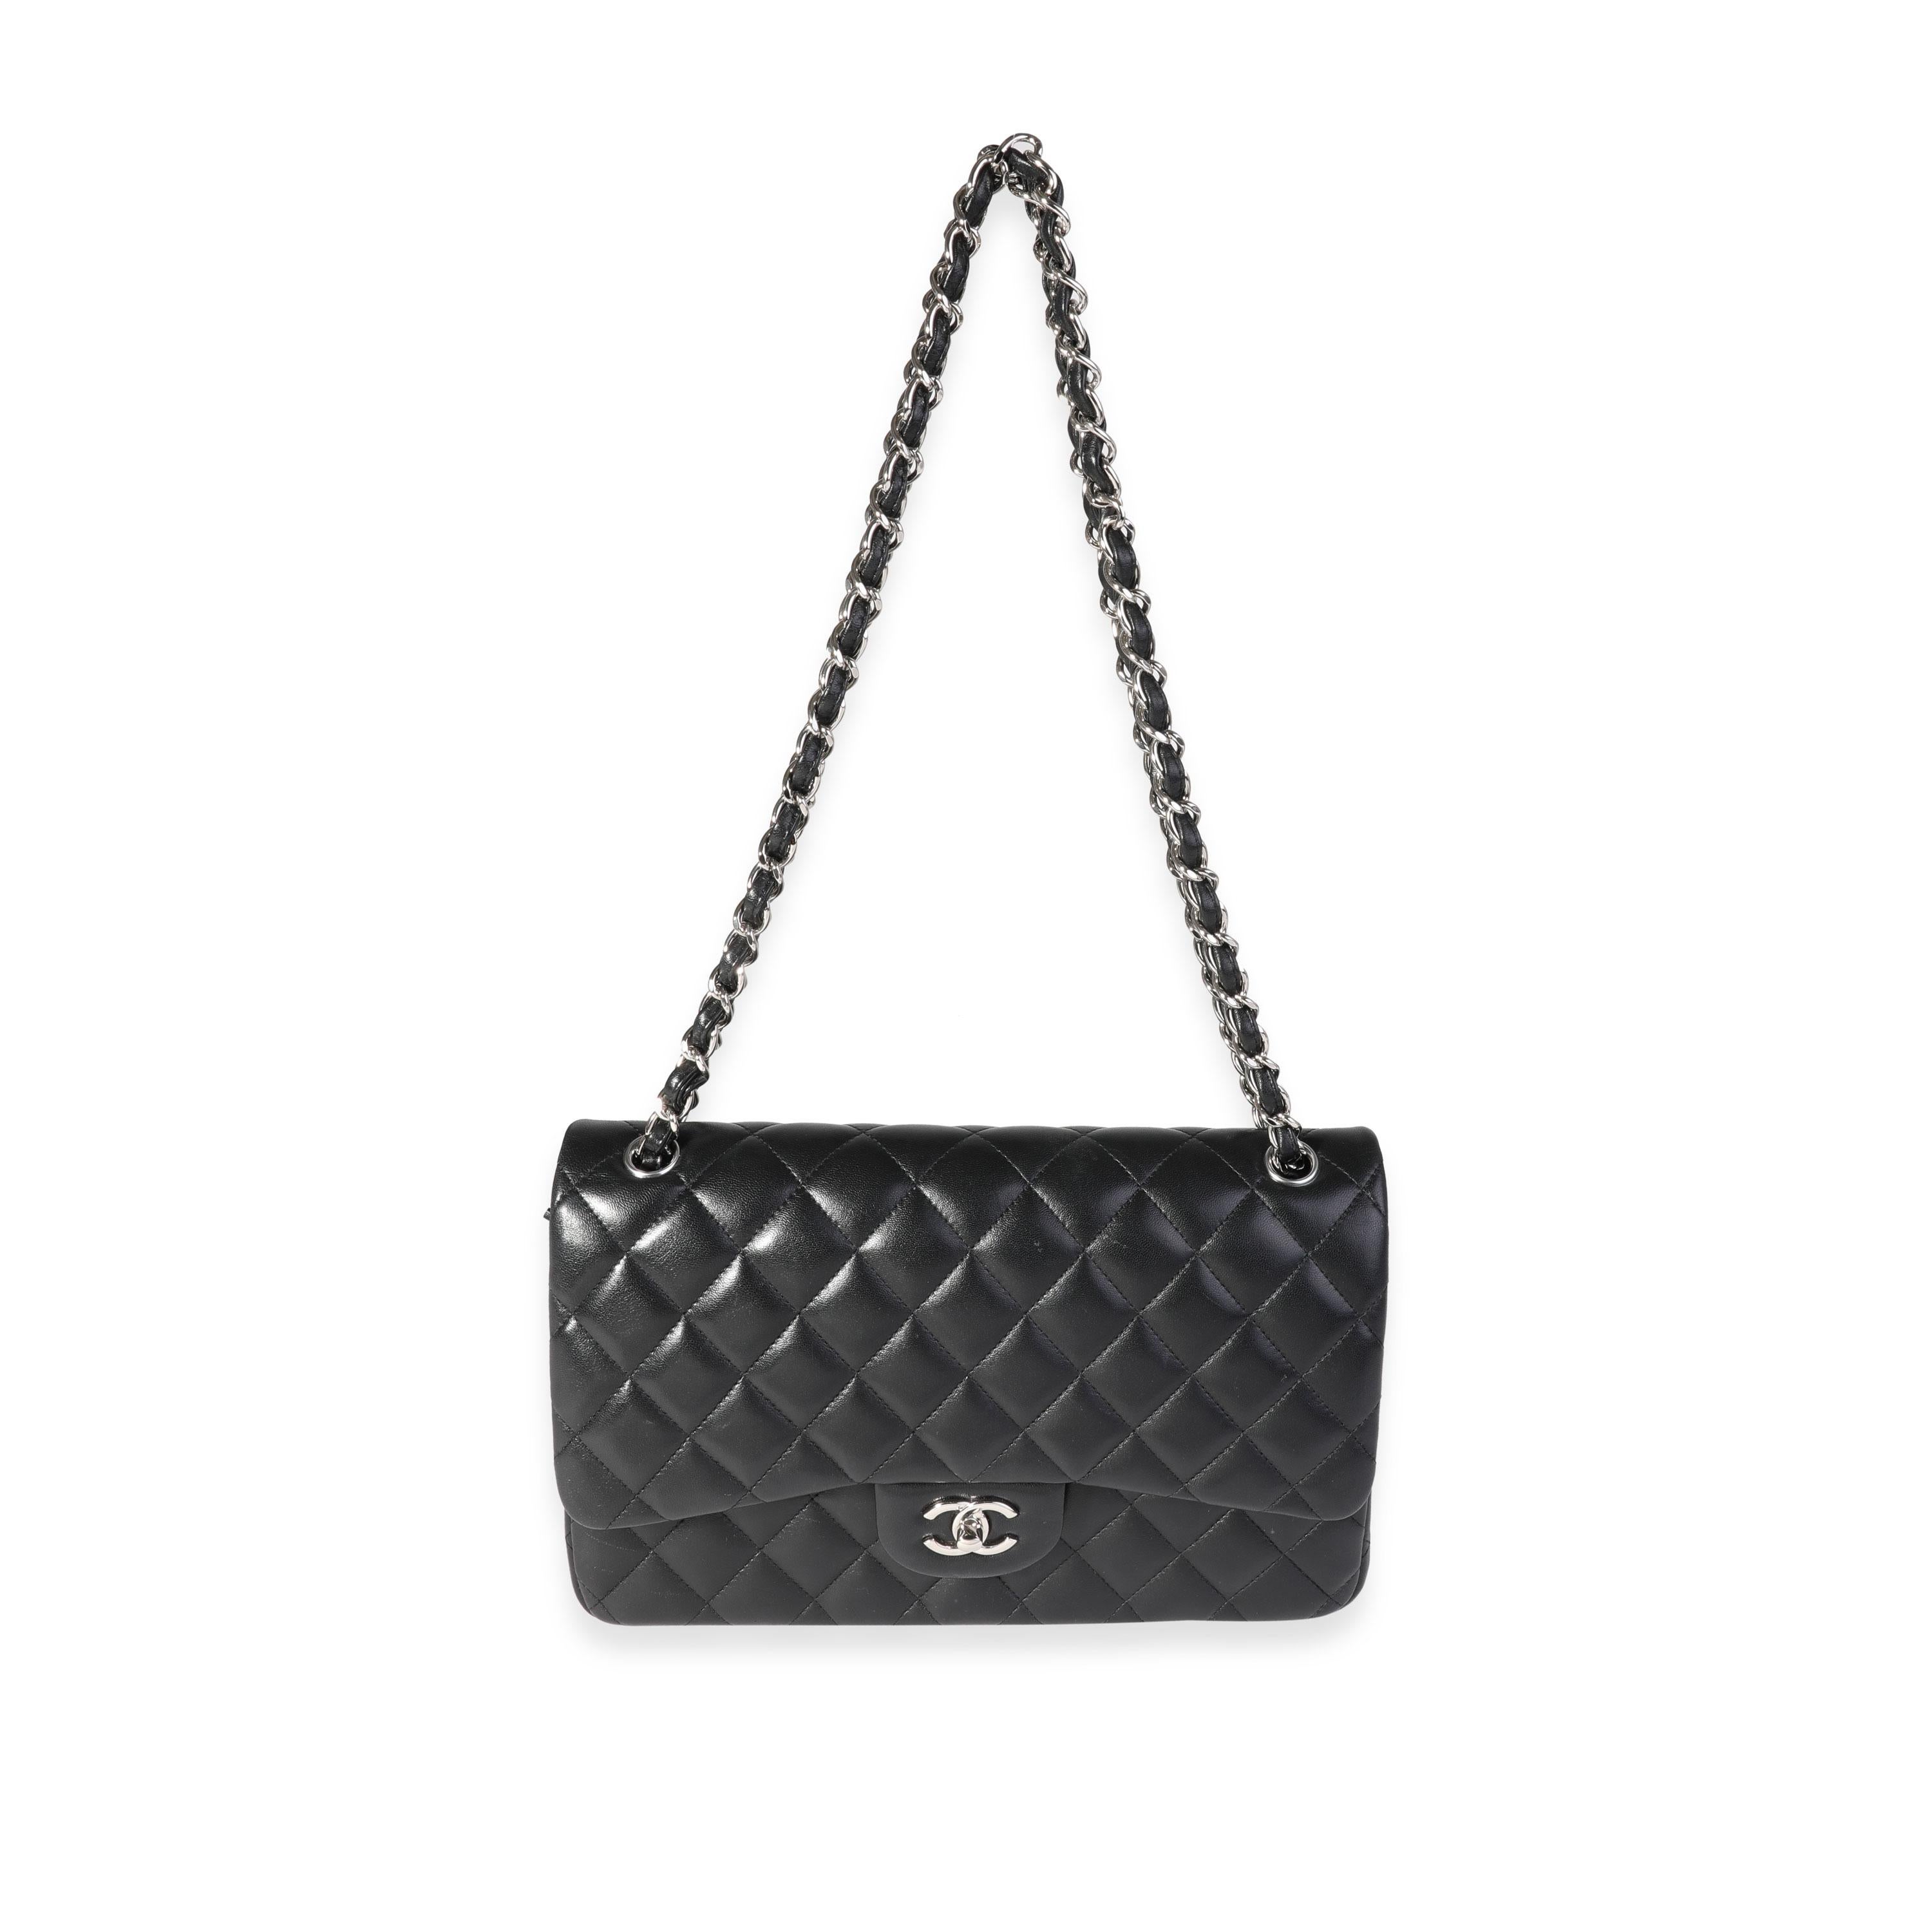 Listing Title: Chanel Black Quilted Lambskin Jumbo Classic Double Flap Bag
SKU: 121373
MSRP: 9500.00
Condition: Pre-owned 
Handbag Condition: Good
Condition Comments: Good Condition. Scuffing to corners and throughout exterior. Light scratching to